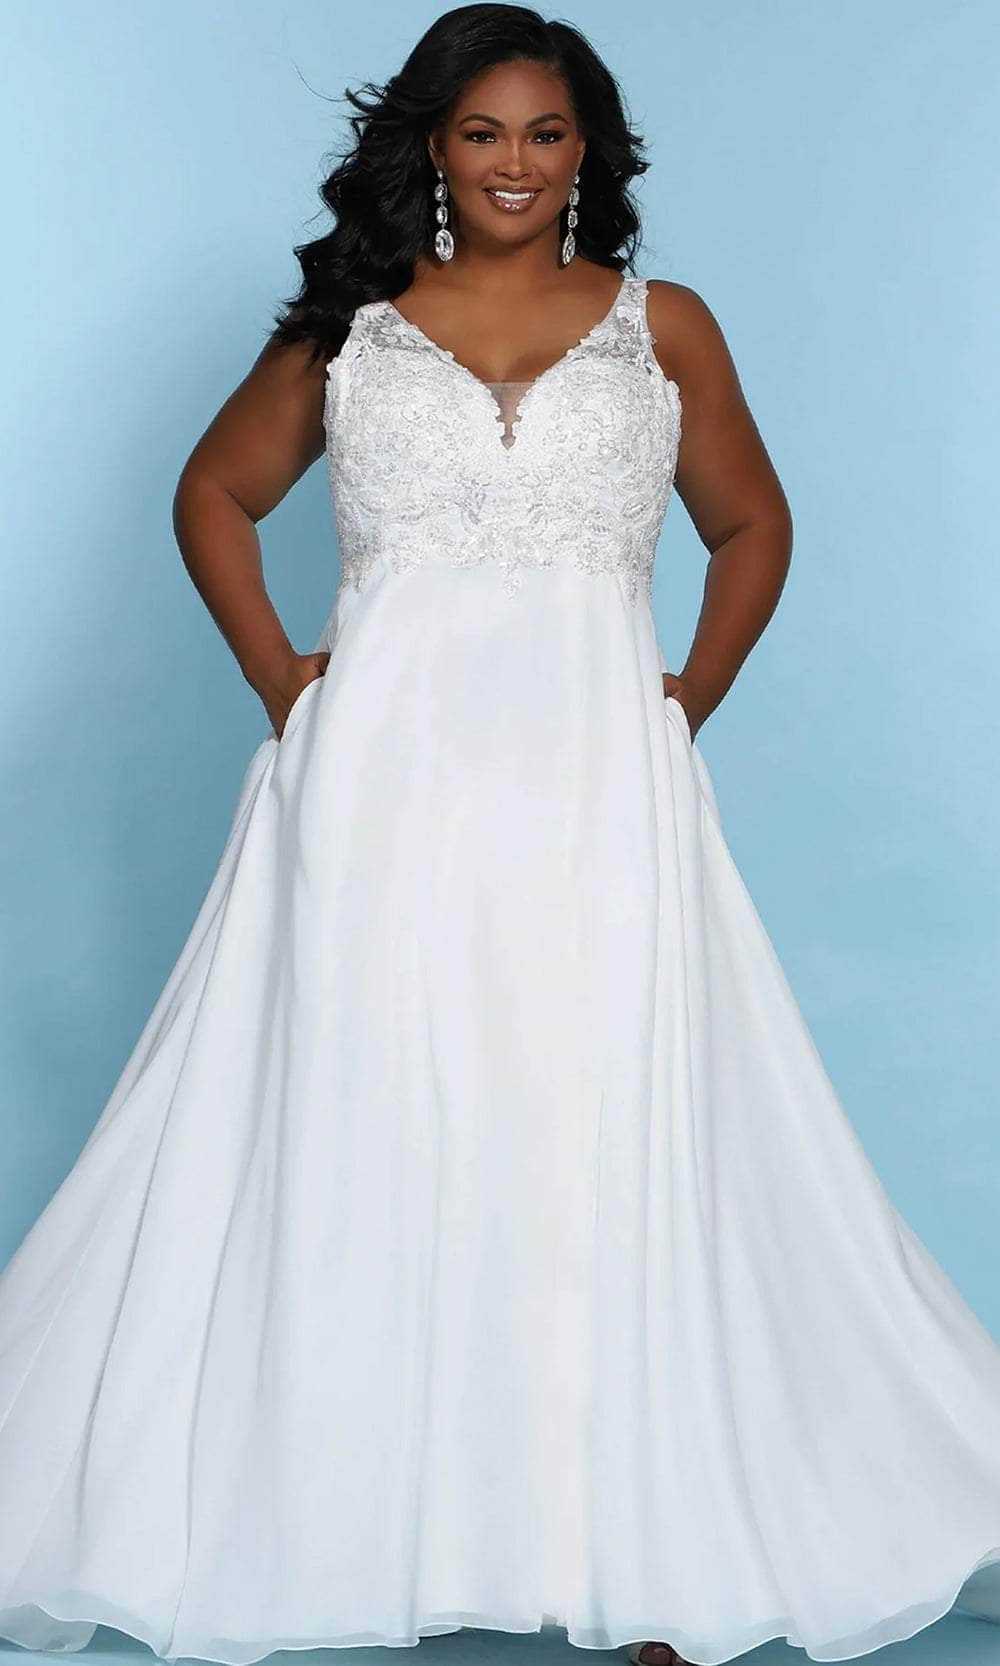 Sydney's Closet Bridal, Sydney's Closet Bridal - SC5246 Floral Embroidered A-Line Bridal Dress